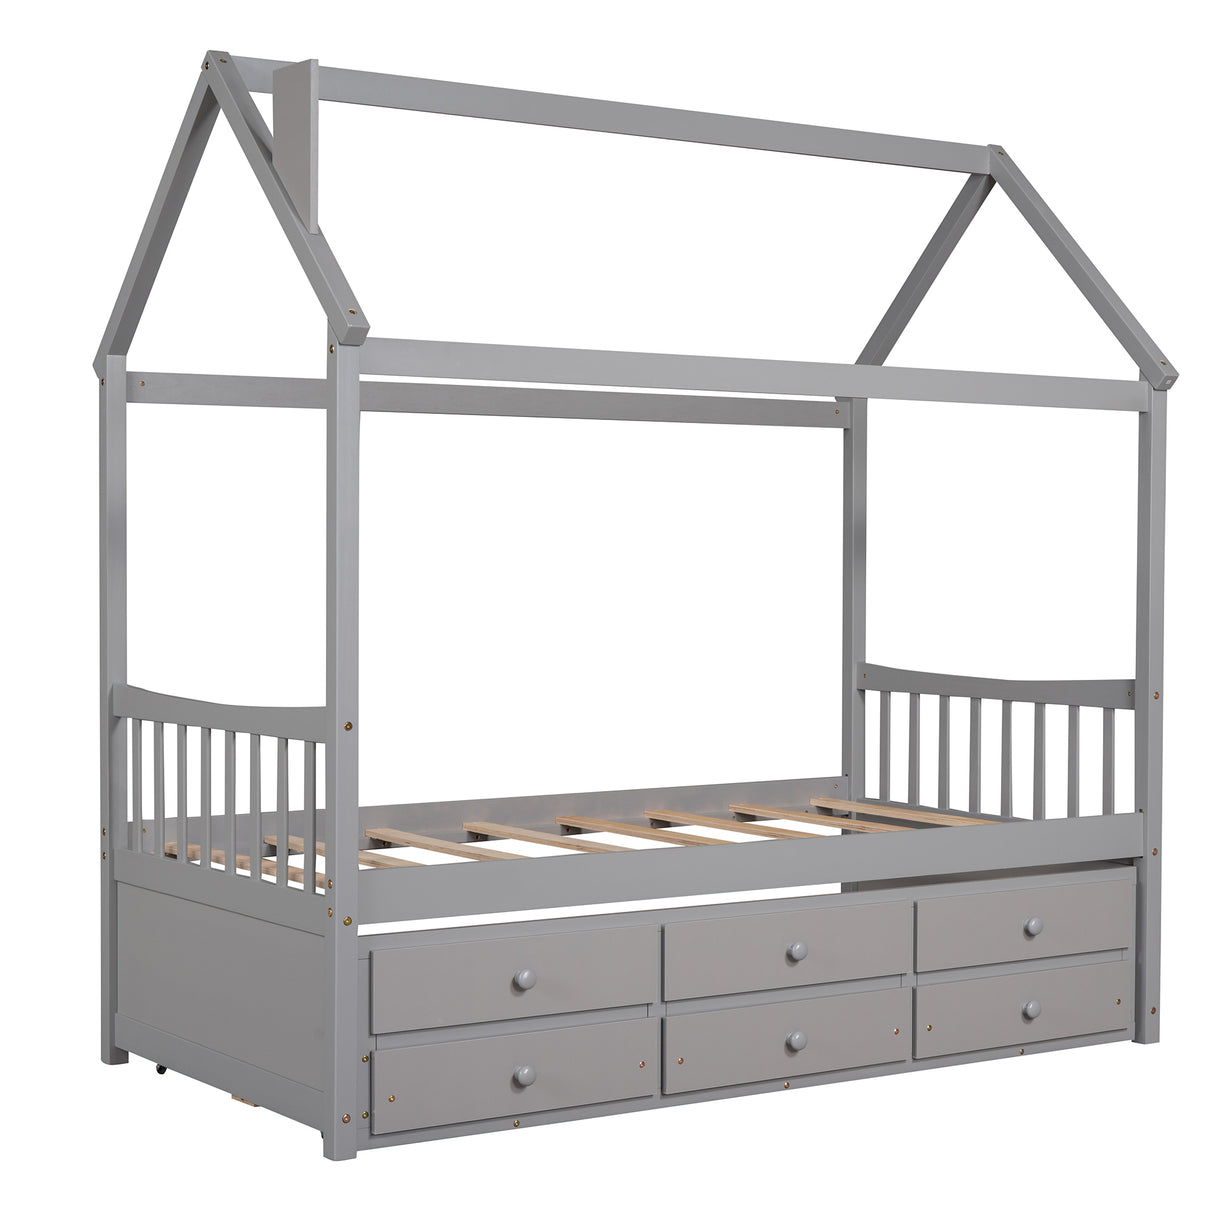 Twin size Wooden House Bed with Trundle and 3 Storage Drawers-Gray - Home Elegance USA